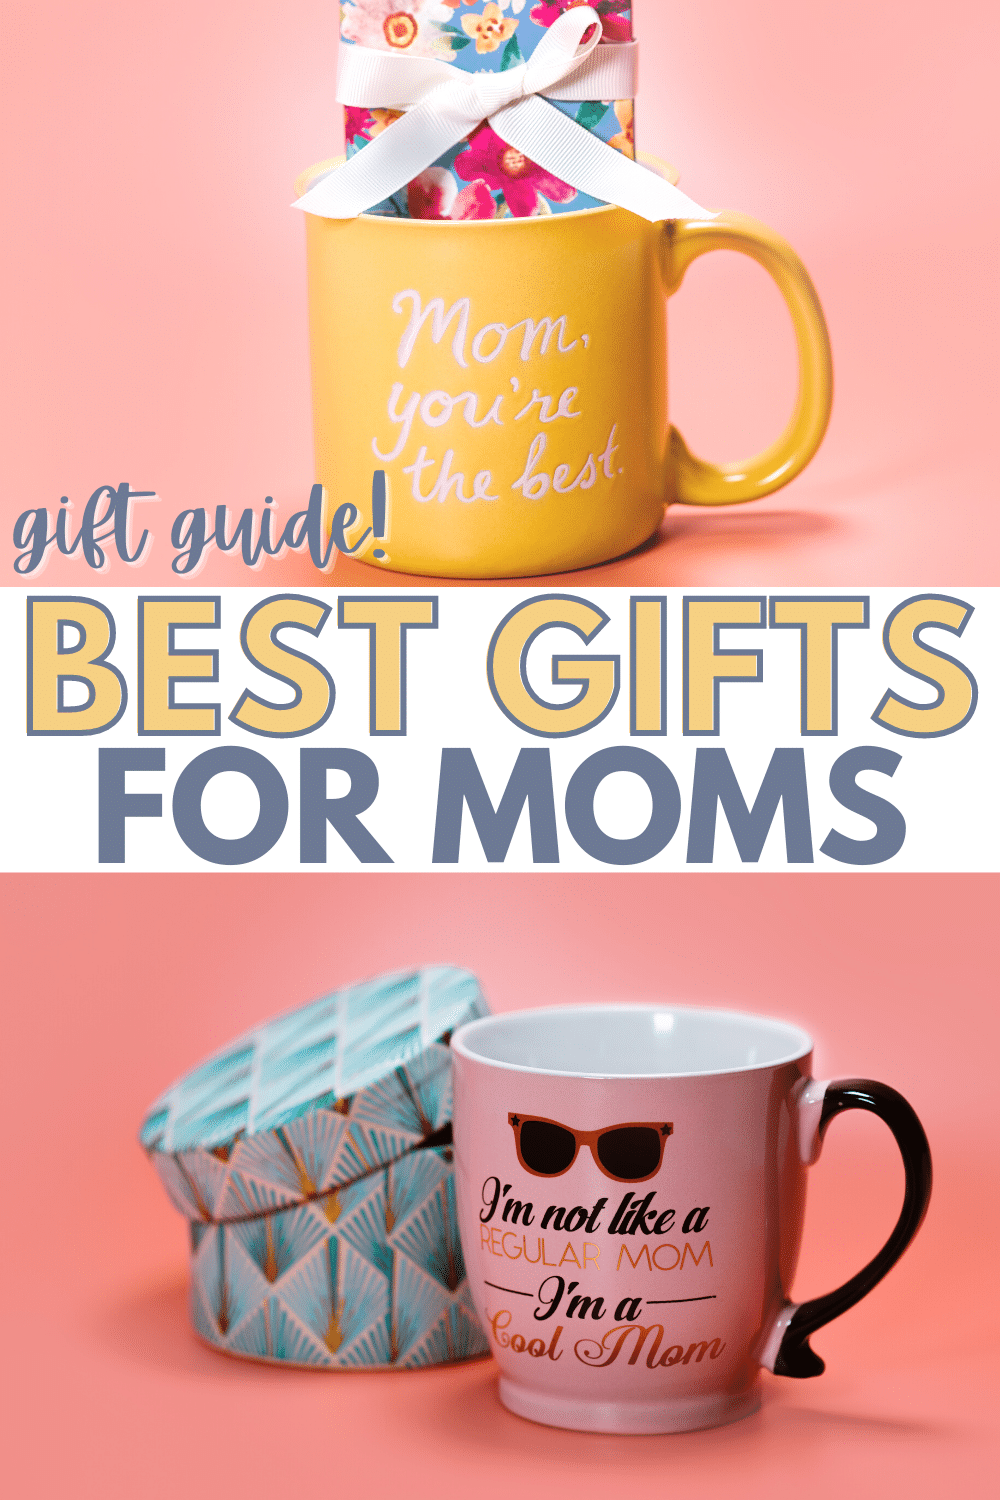 No matter how old you are, trying to figure out what to buy for mom is tough. That's why I've put together a list of the best gifts for moms. #giftguide #giftideas #formom #giftsformom via @wondermomwannab